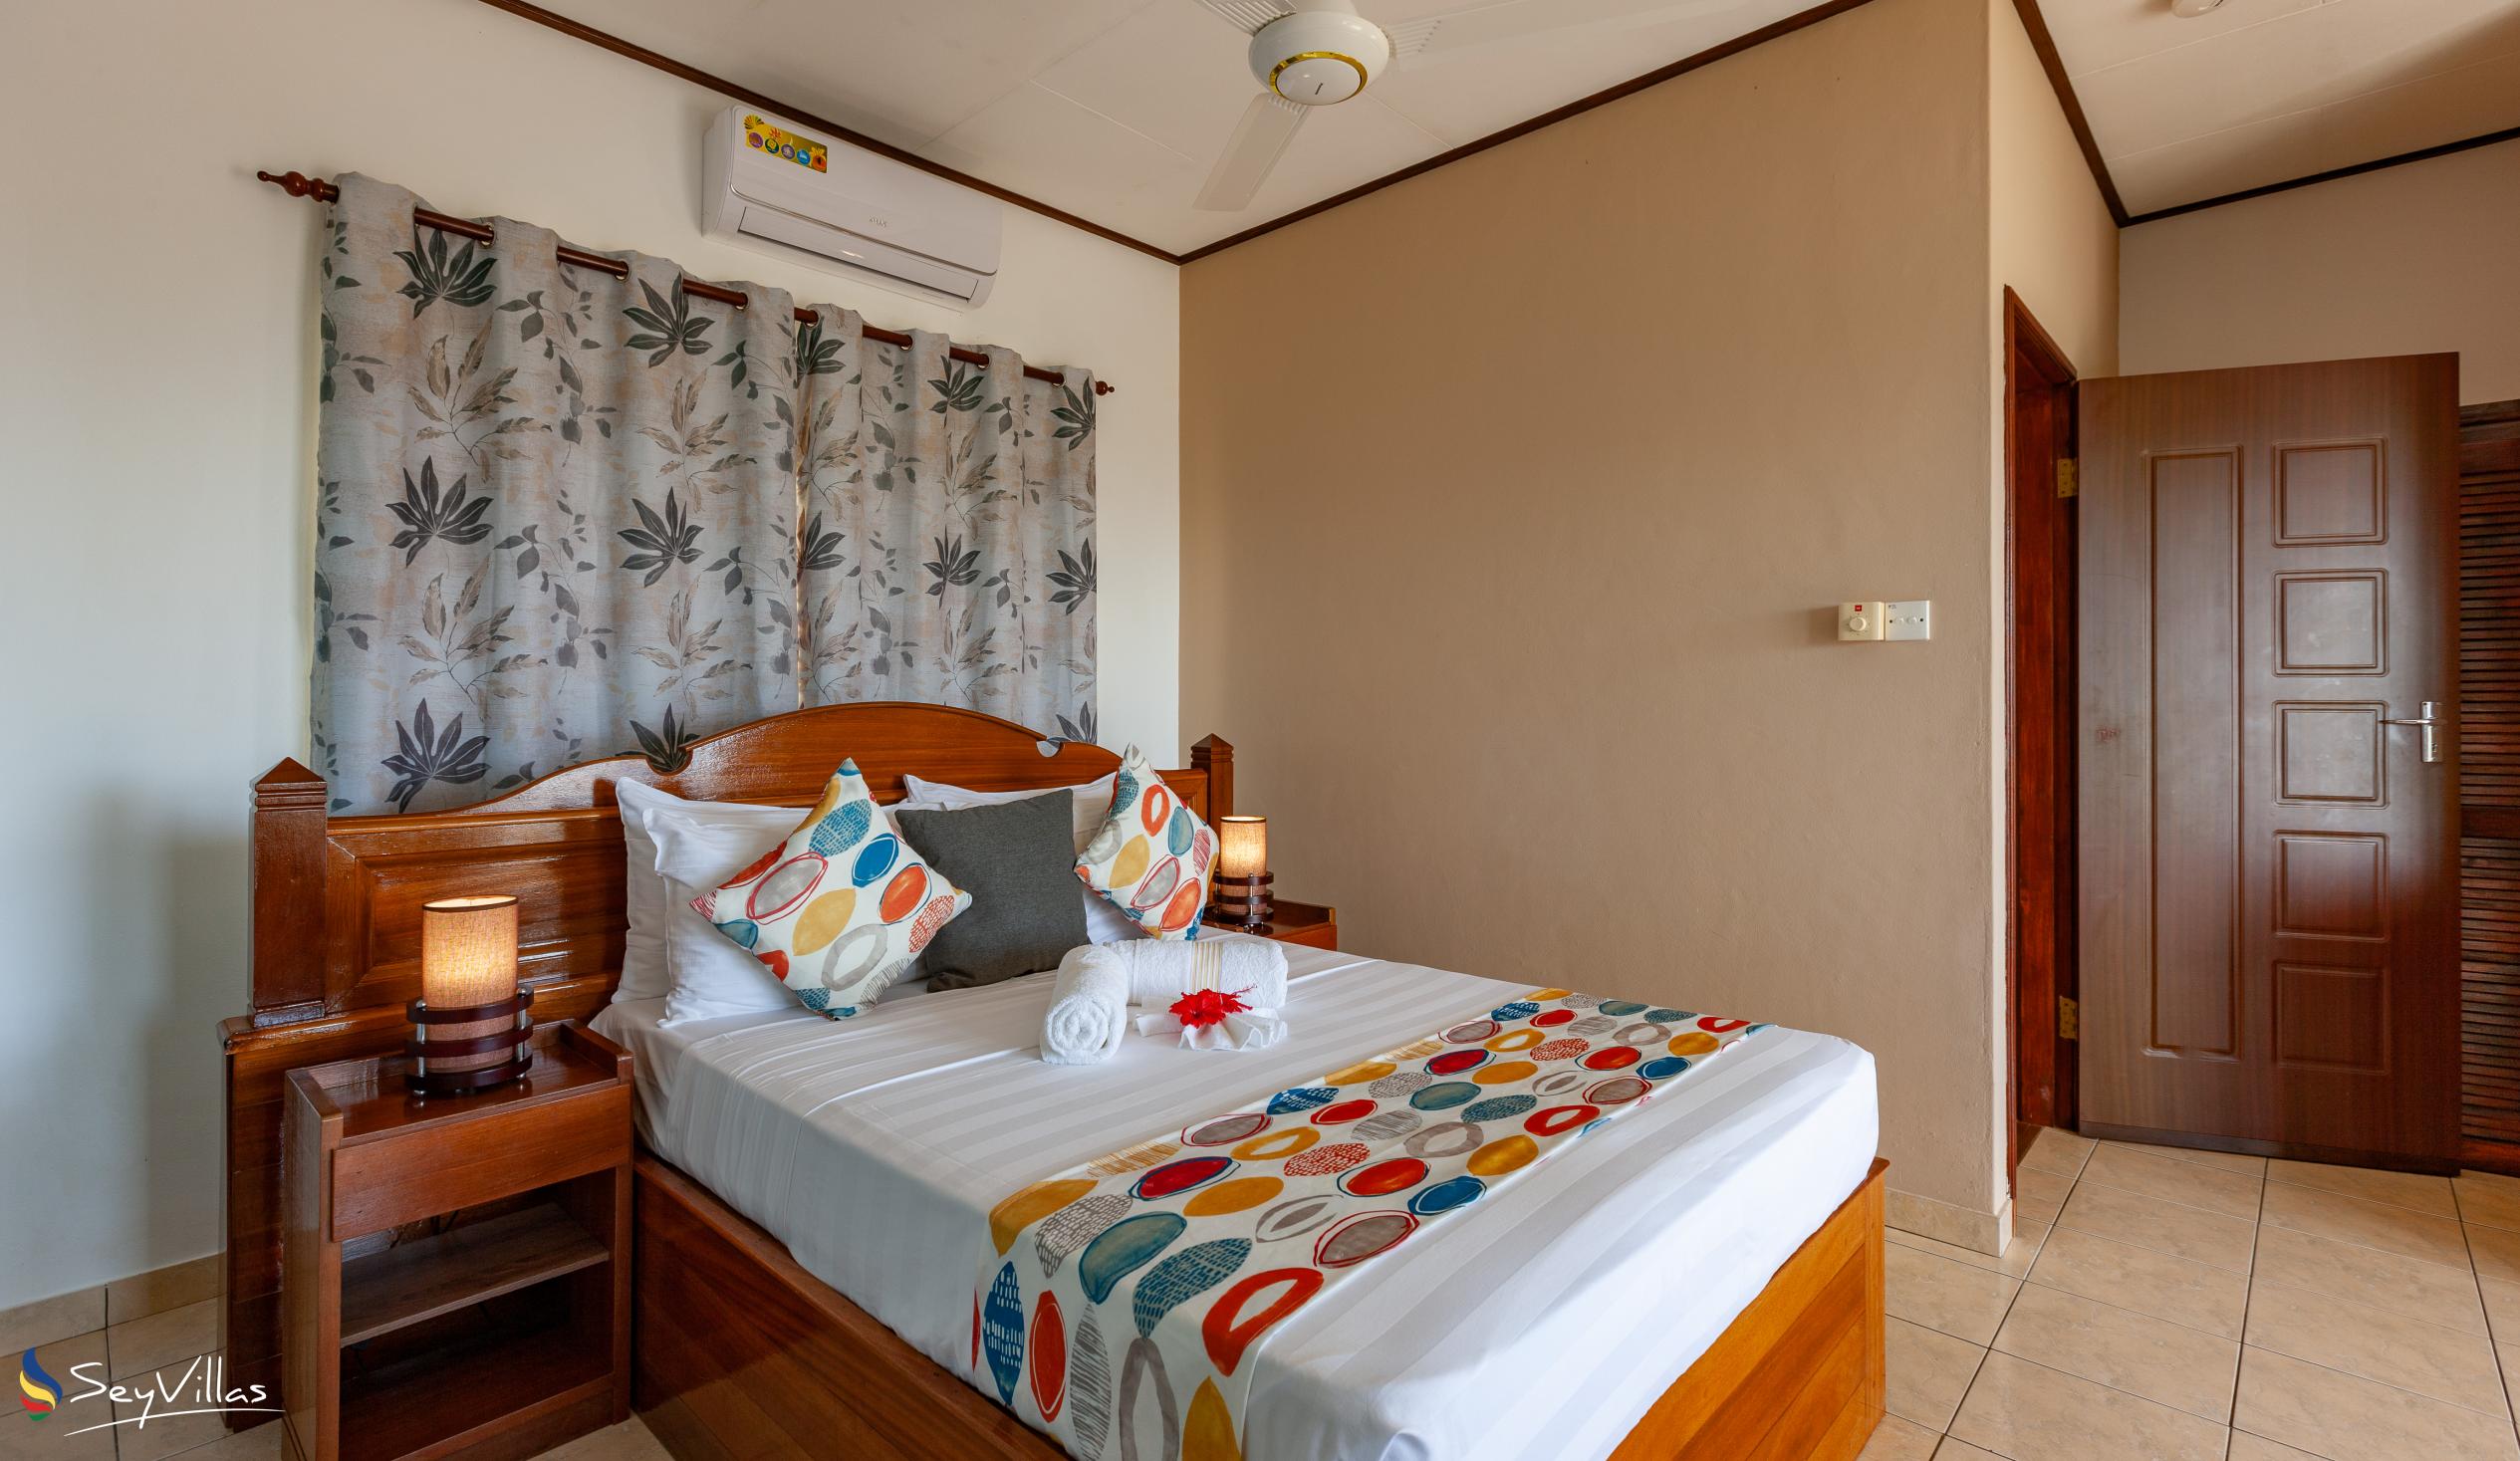 Foto 10: Saria Self Catering - Appartement 3 chambres - Praslin (Seychelles)